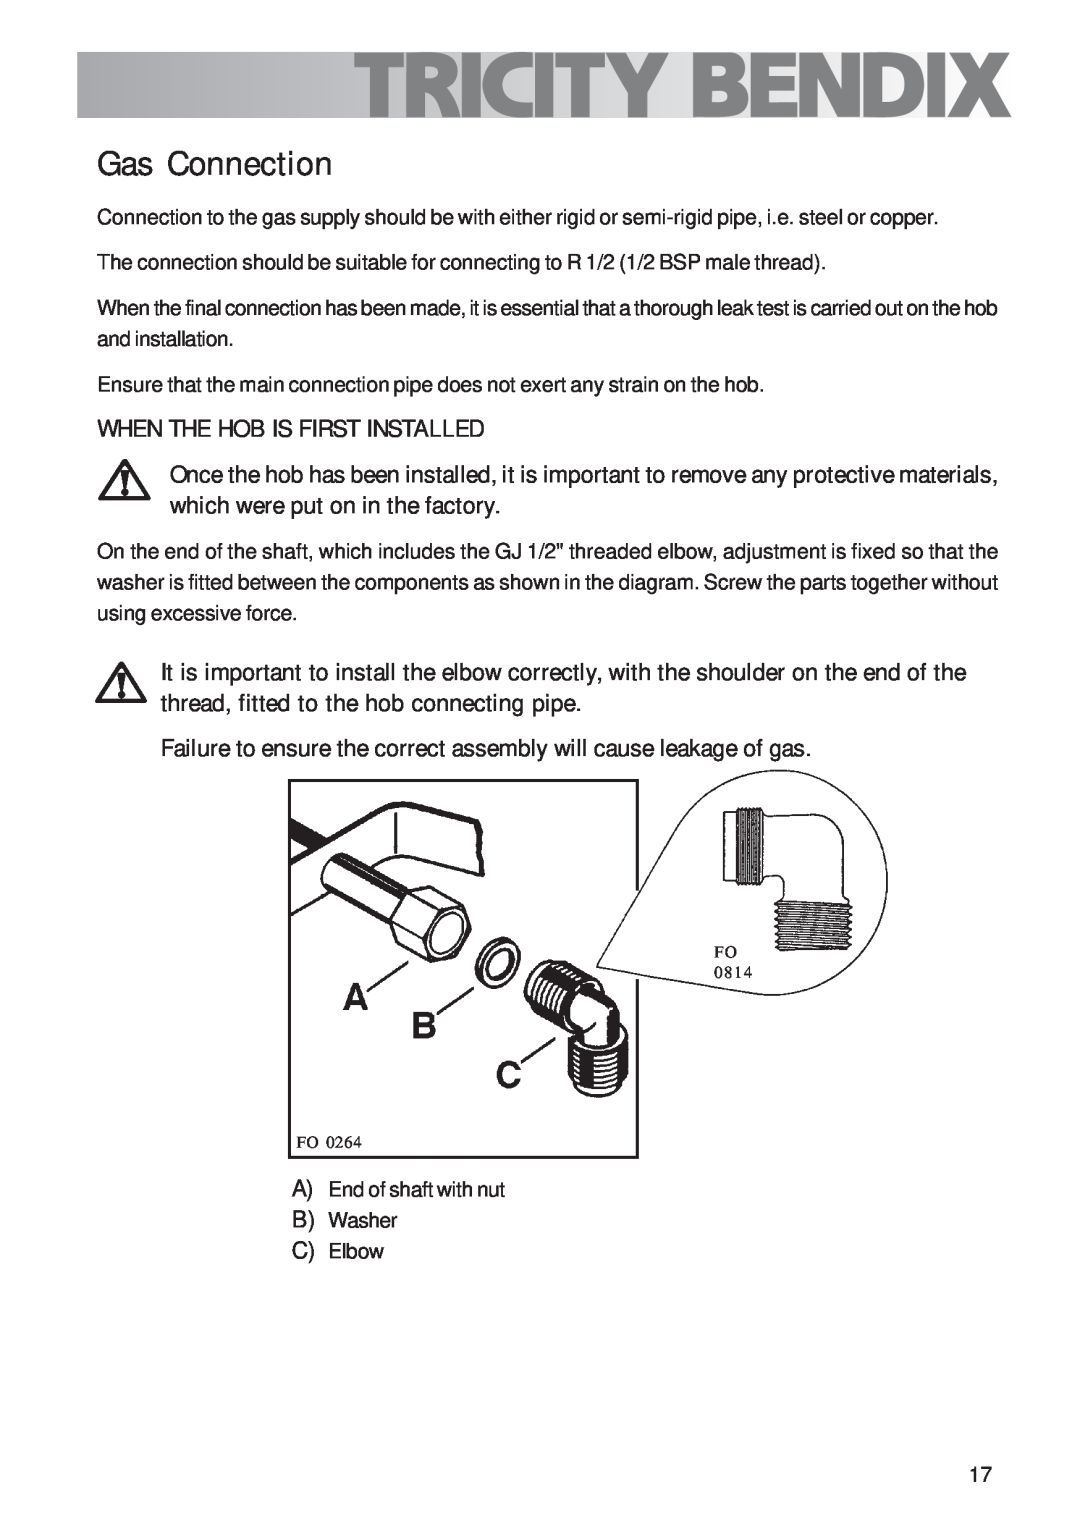 Tricity Bendix TBG700 user manual Gas Connection, When The Hob Is First Installed 